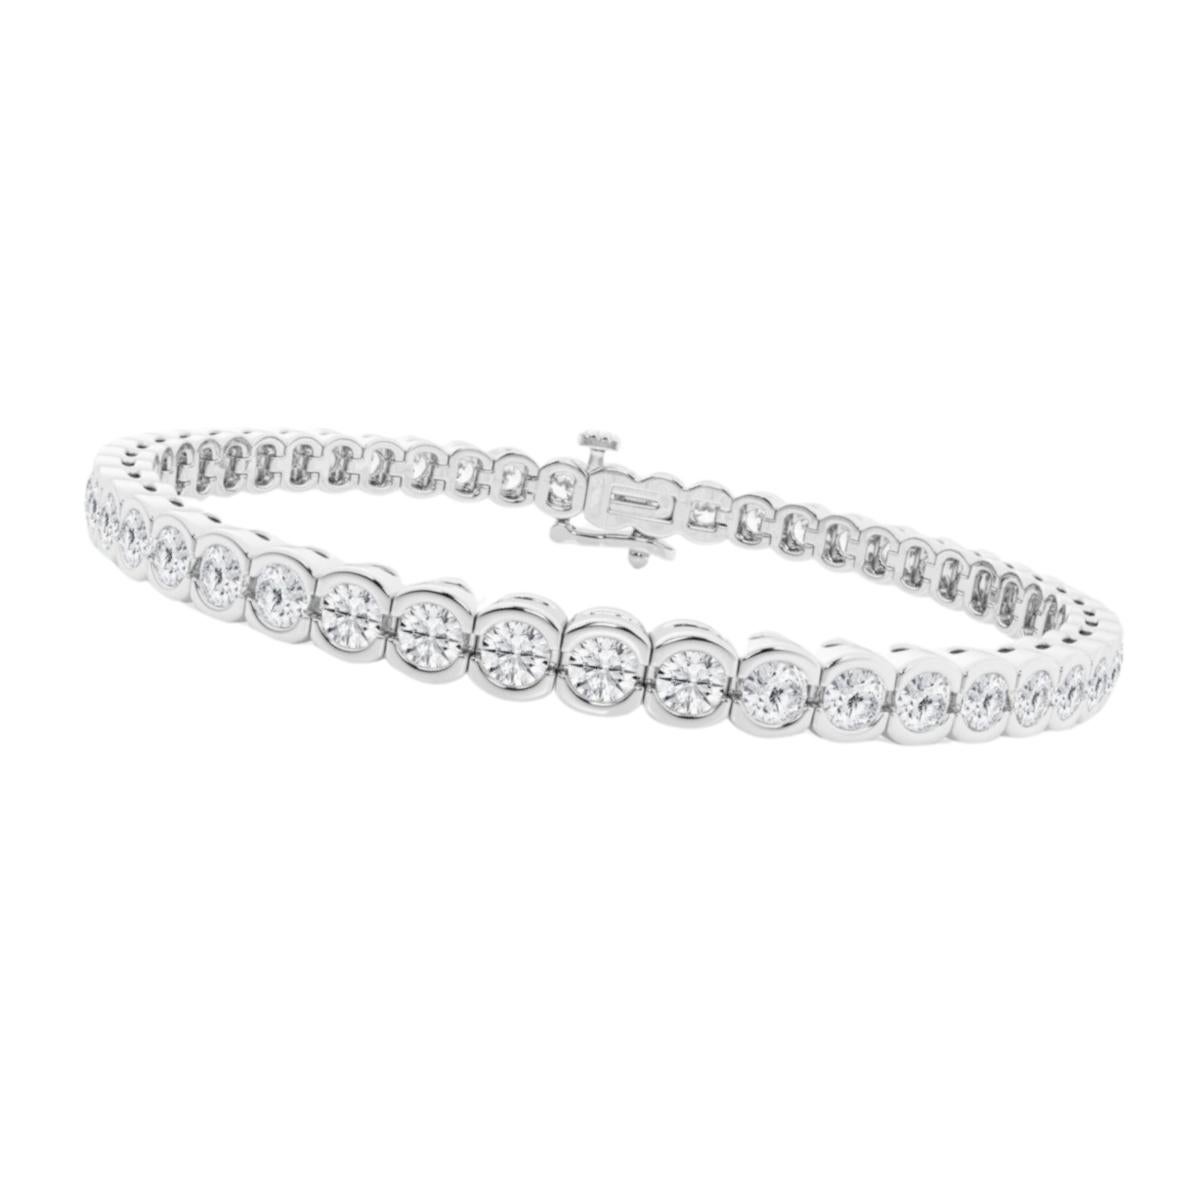 Introducing an exquisite 8 Carat Round Cut Diamond Platinum Tennis Bracelet, a dazzling testament to luxury and sophistication. This opulent bracelet features a stunning array of round-cut diamonds, totaling an impressive 8 carats in weight.
Each